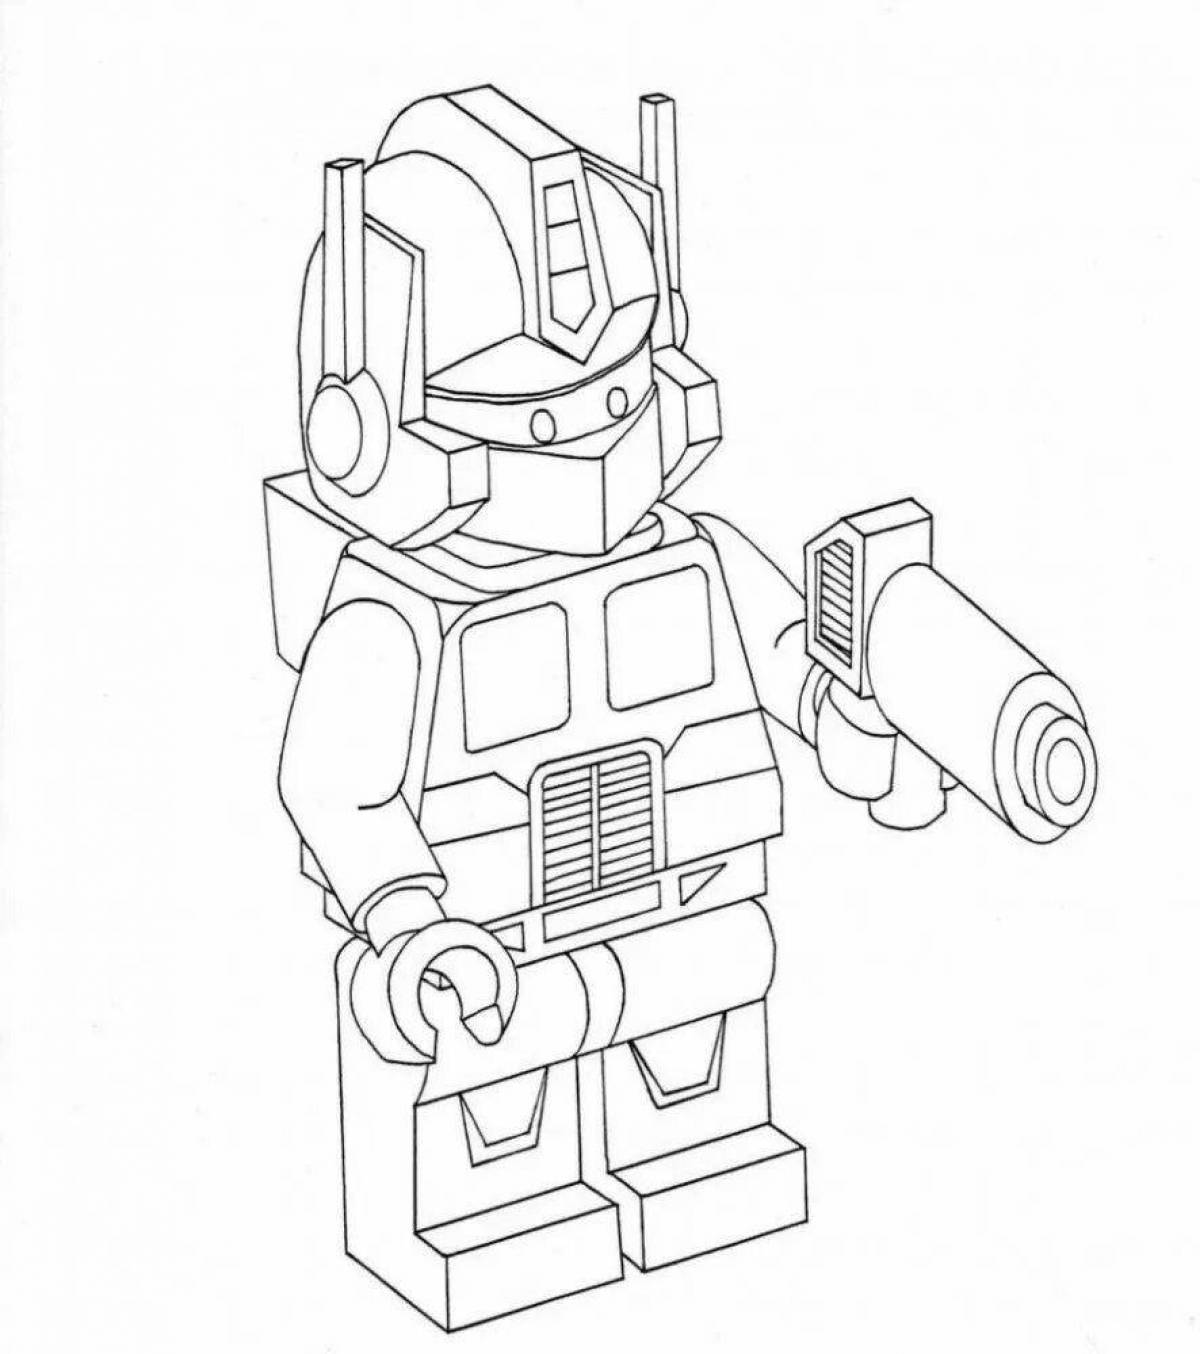 Amazing lego robot coloring page